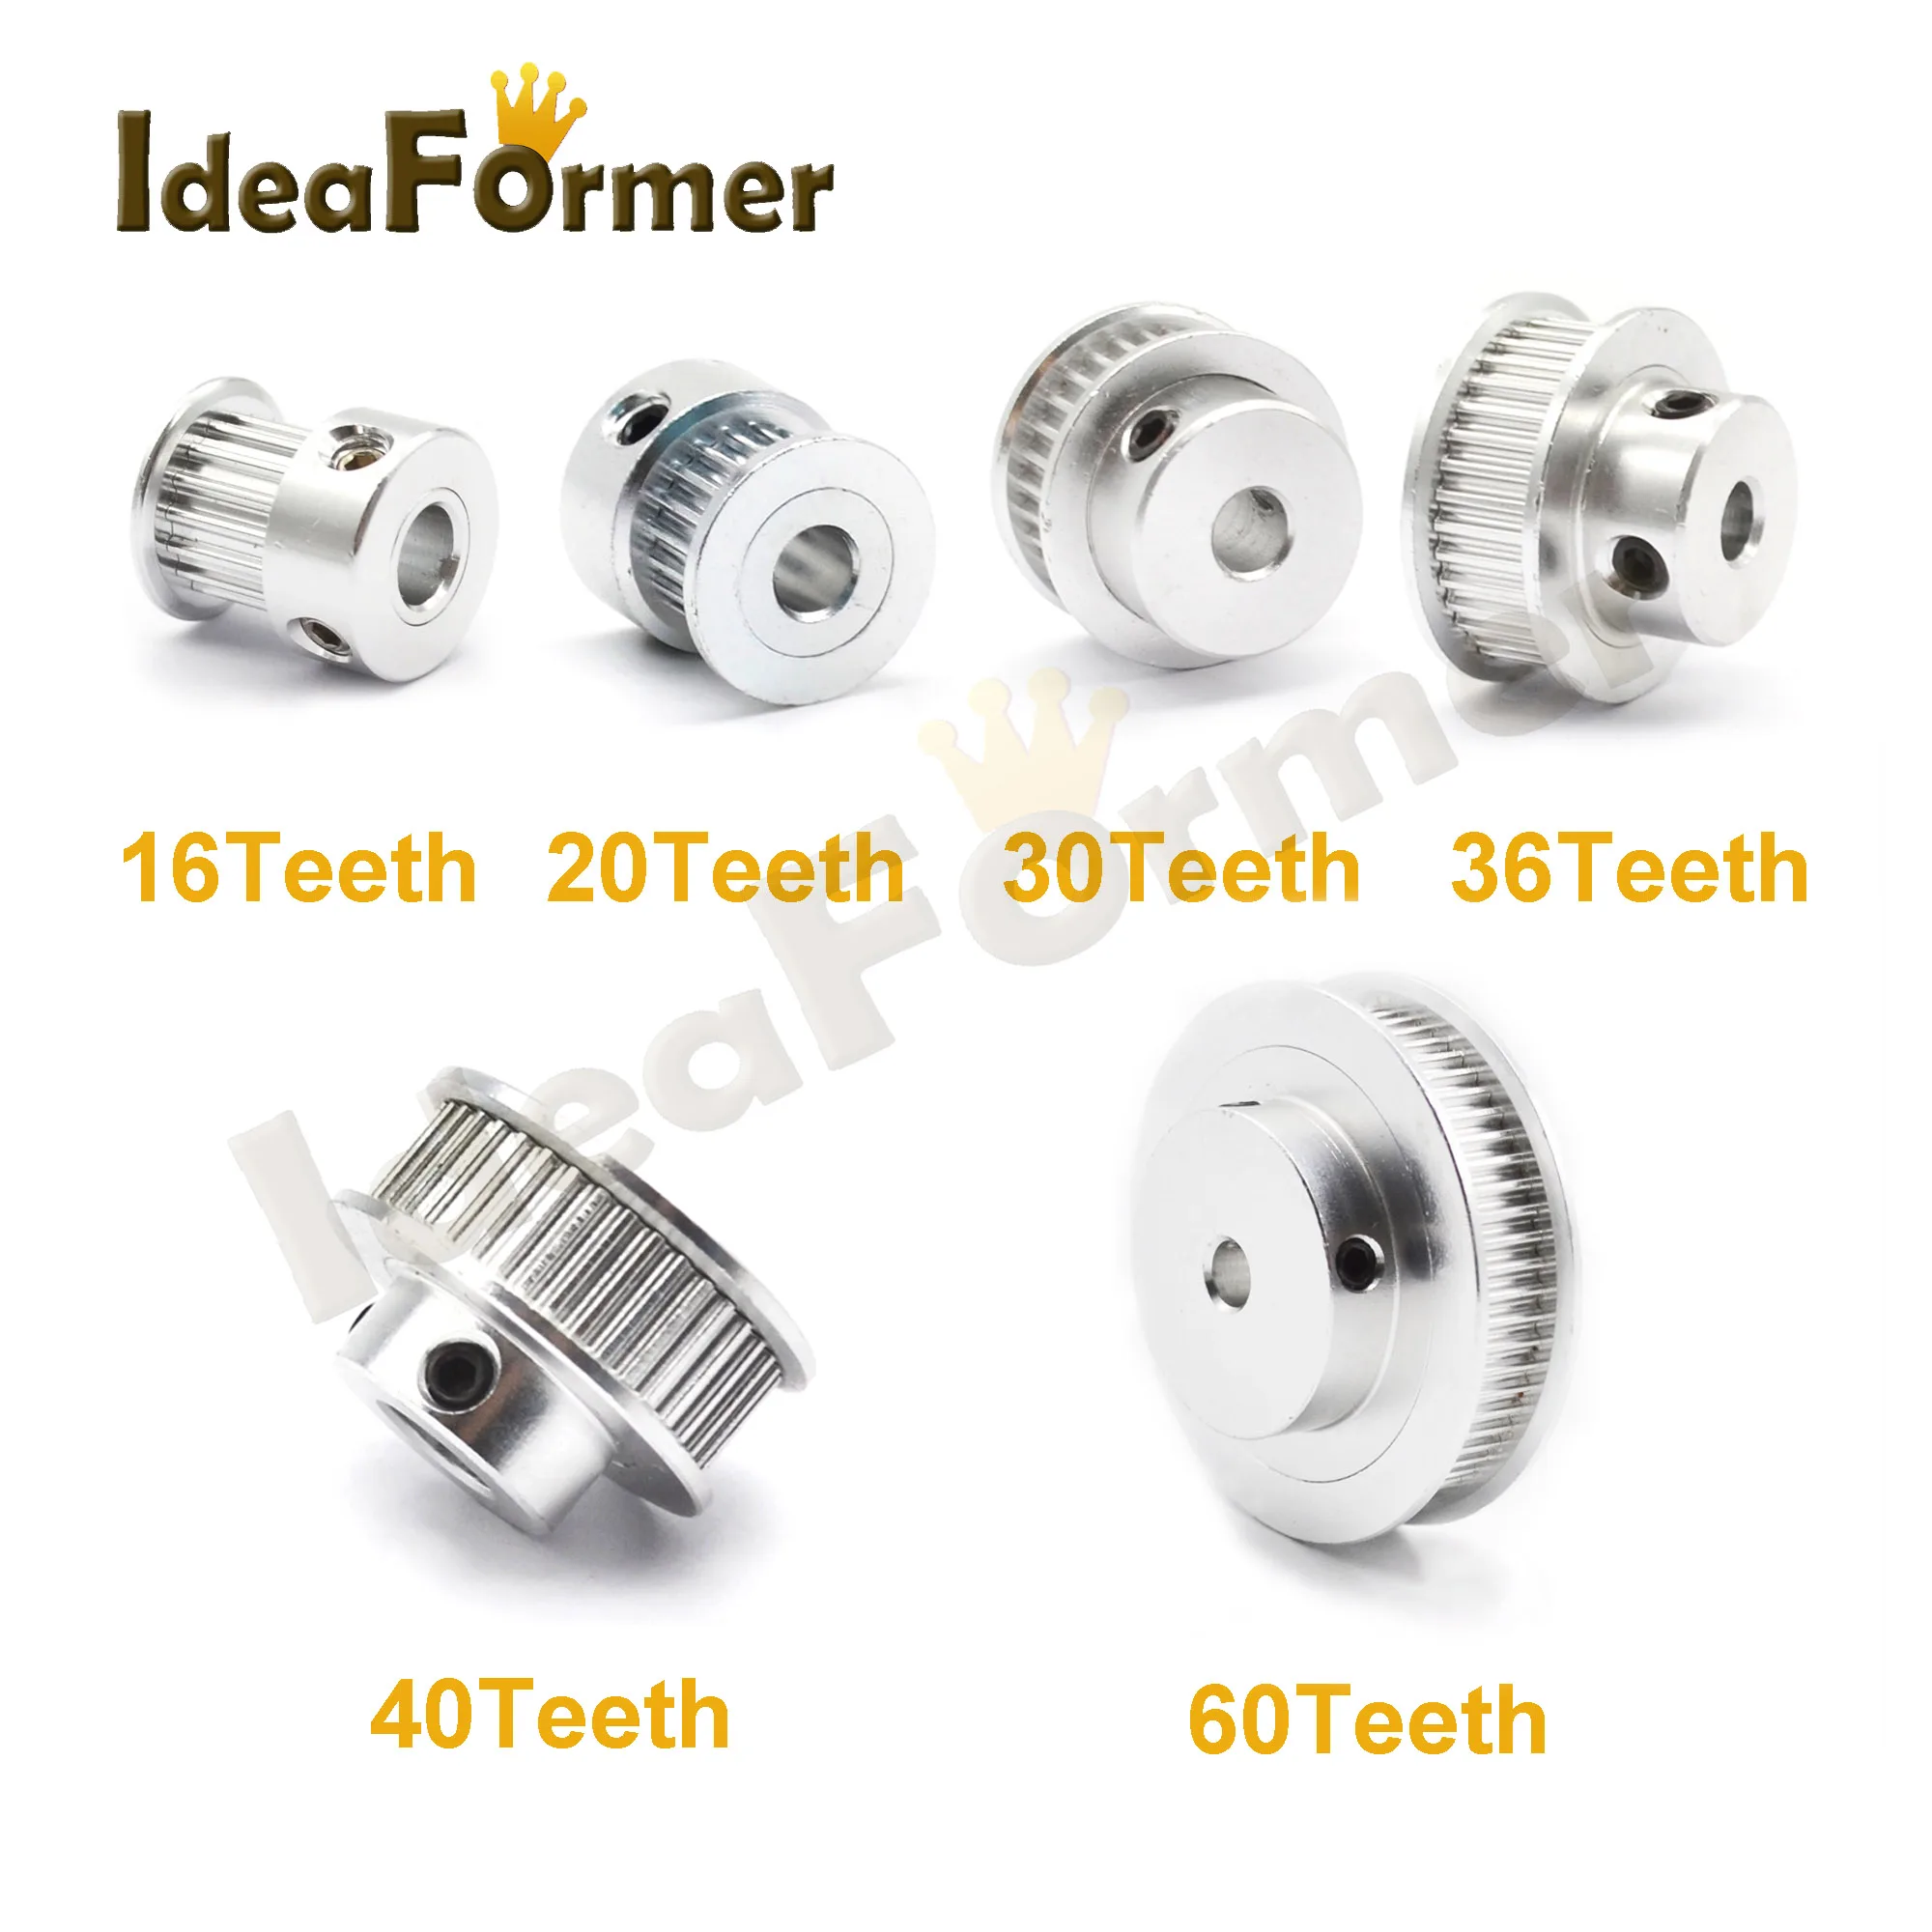 fennirace 50pcs GT2 Idler Timing Pulley 16/20 Tooth Wheel Bore 3/5mm Aluminium Gear Teeth Width 6/10mm 3D Printers Parts for Reprap Part Size : 20T W6 B5 with T